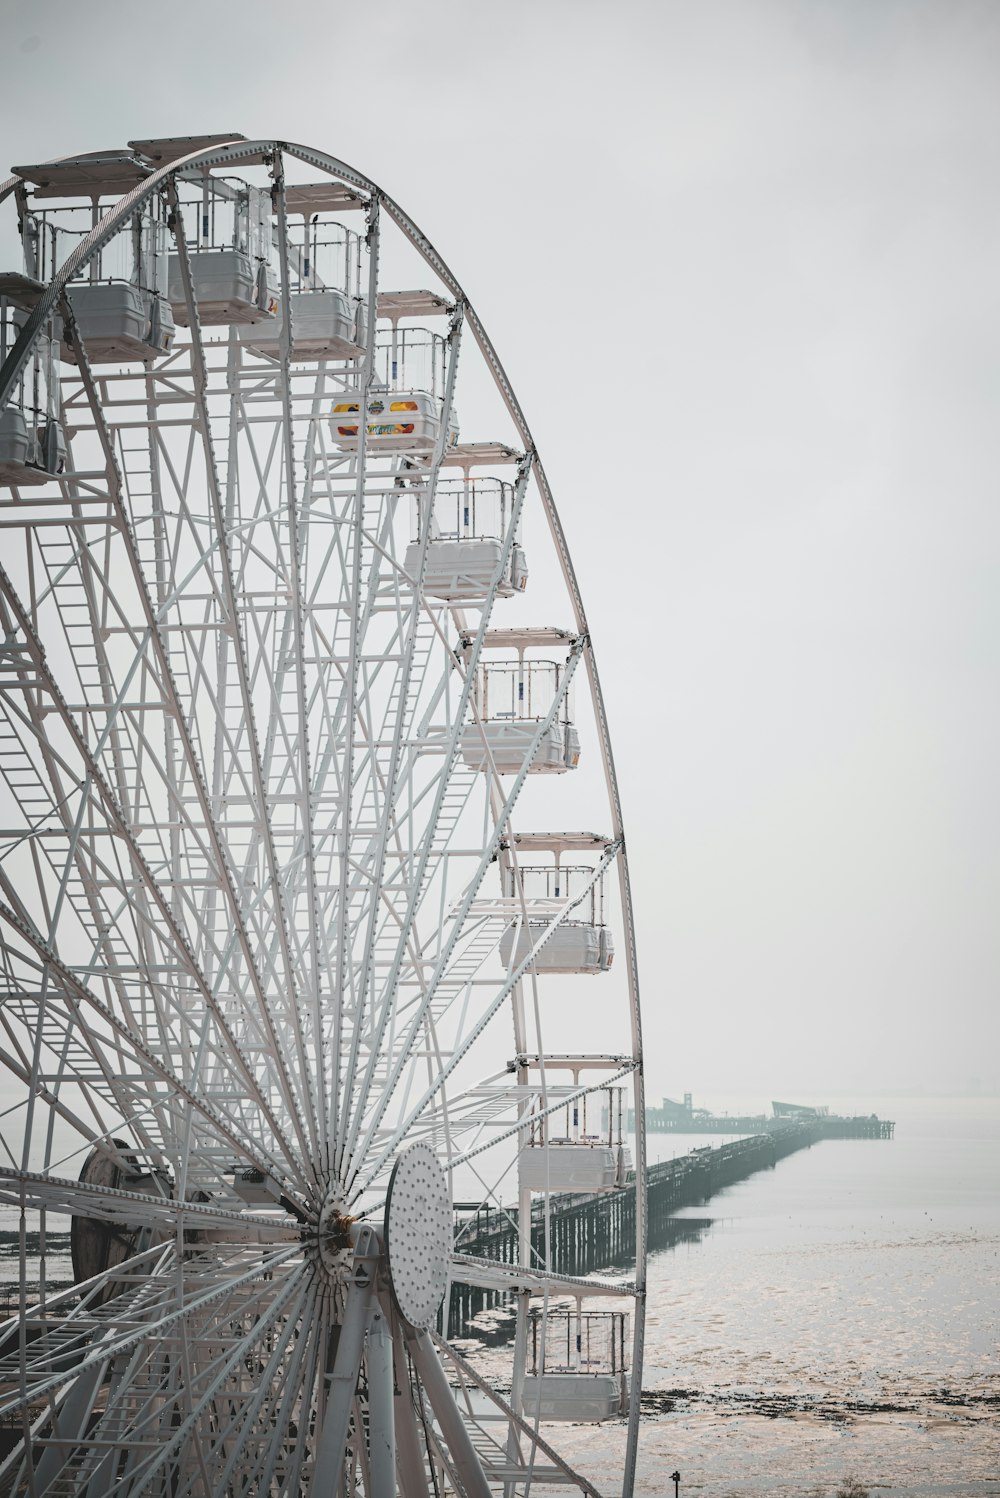 a large ferris wheel sitting next to a body of water